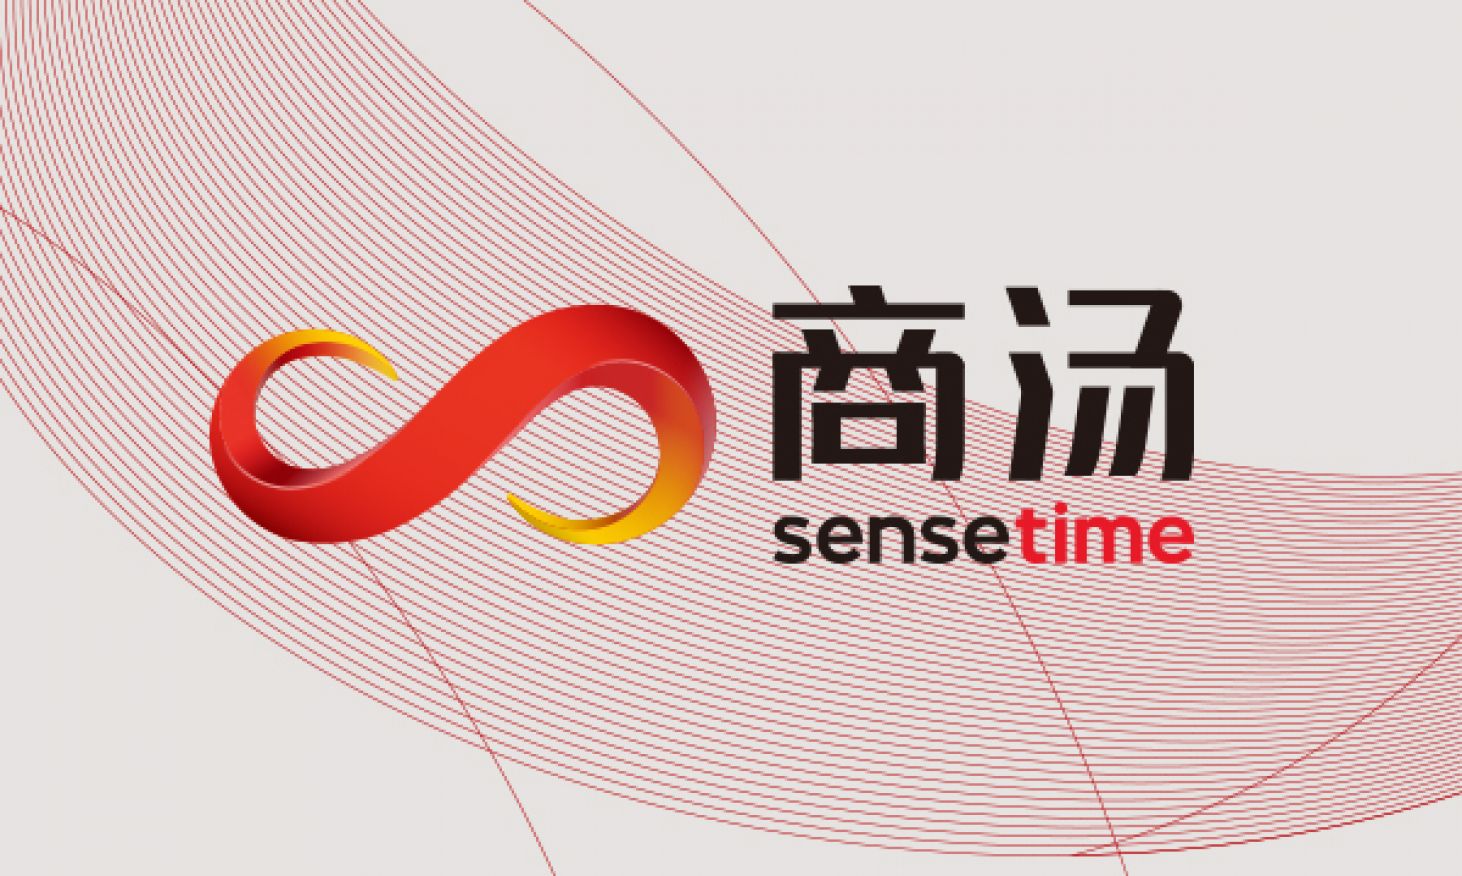 Deals | Alibaba invests in SenseTime to speed up AI adoption in real world cases